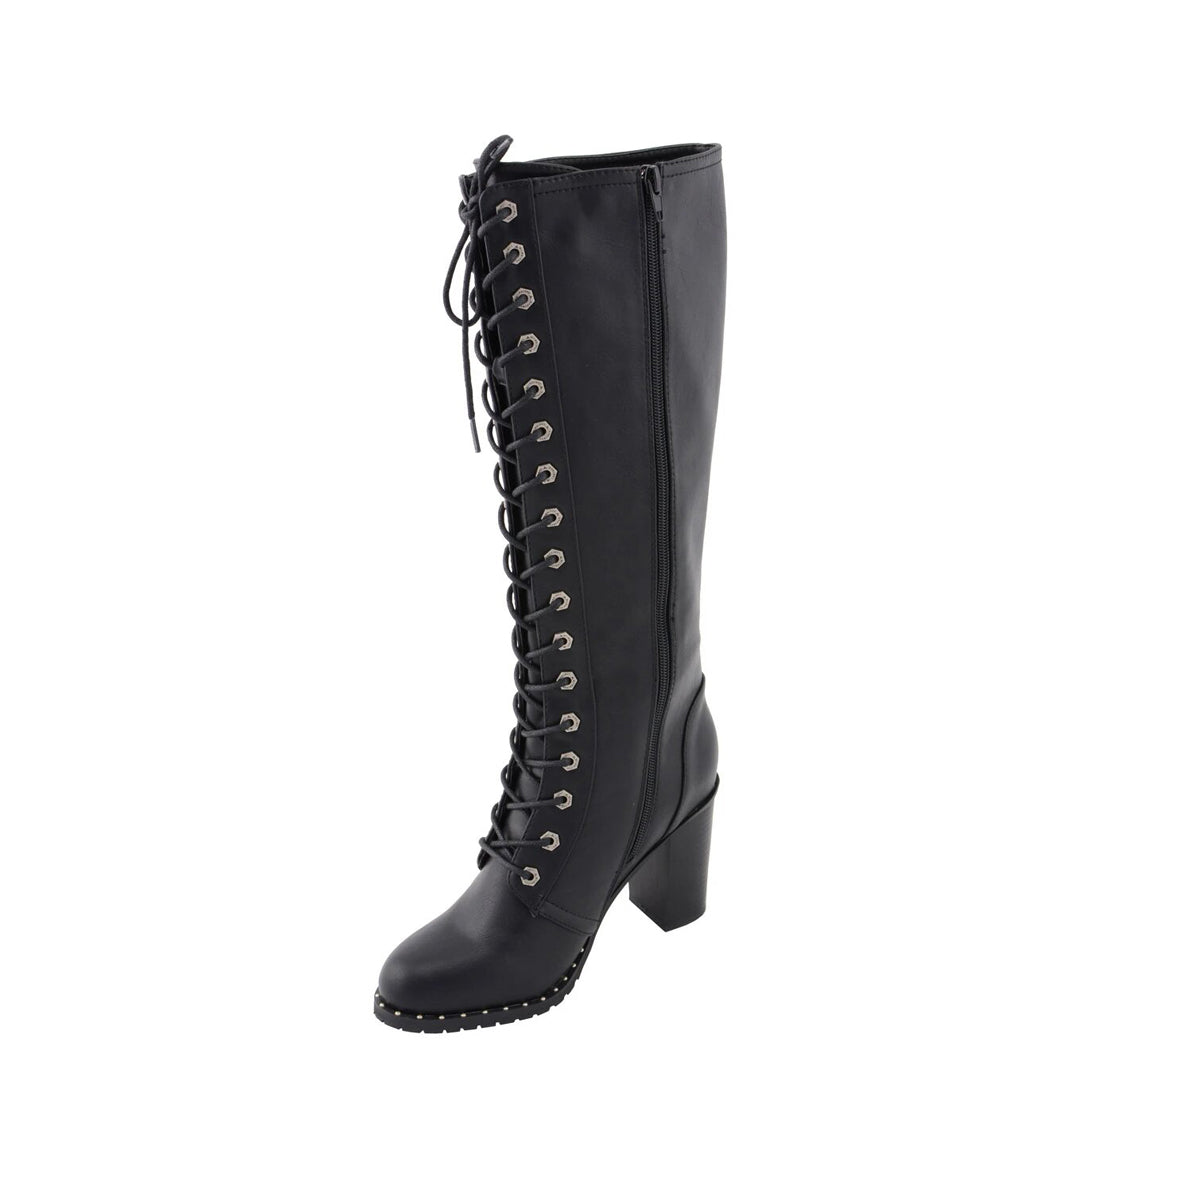 Women Black Lace-Up Tall Boots with Platform Heel